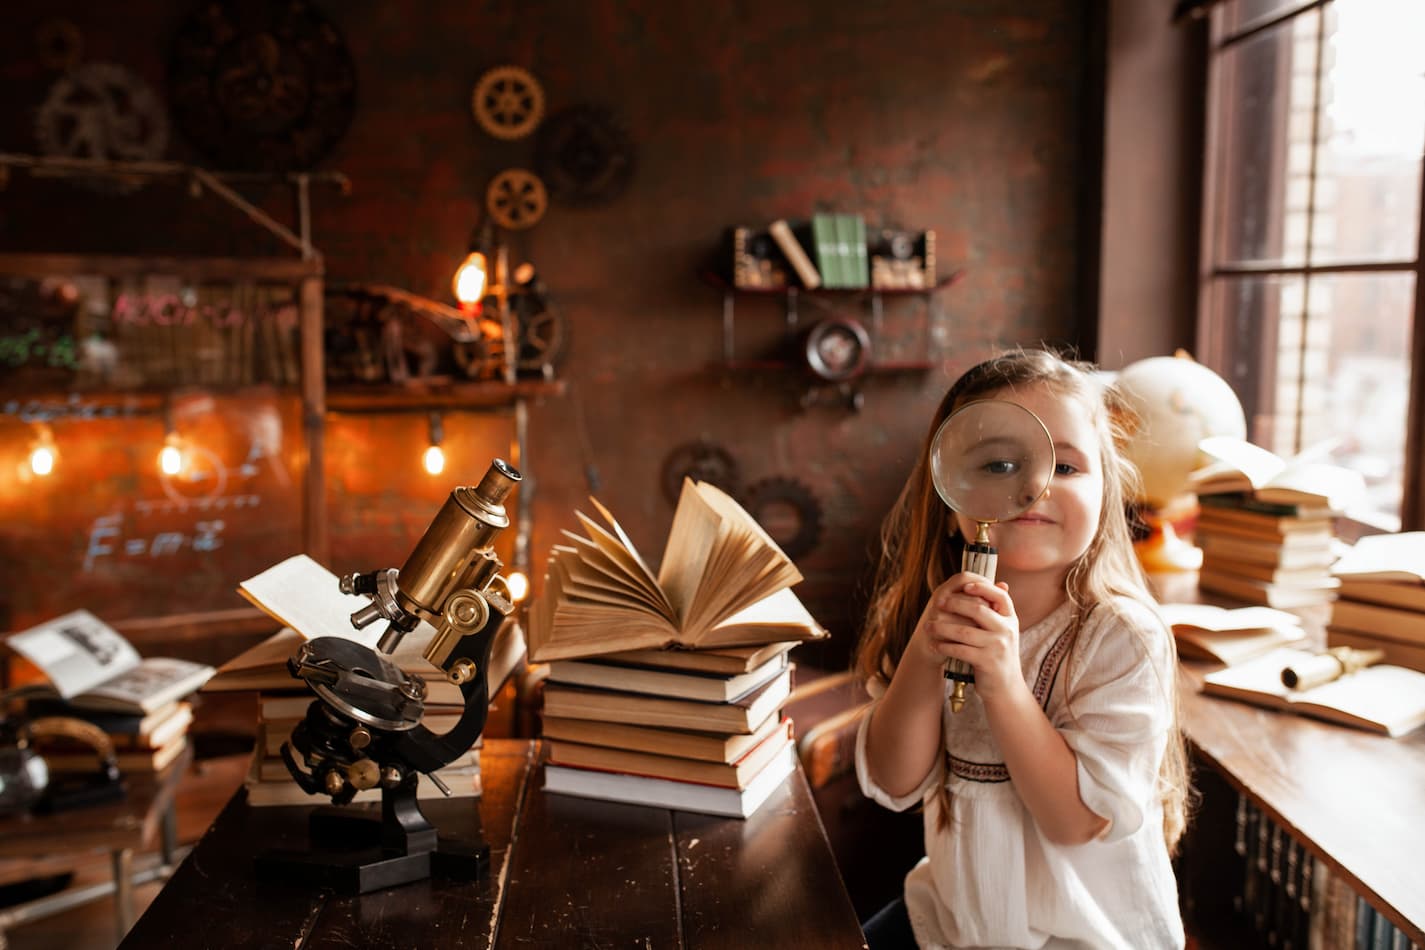 image of a pile of books and a girl holding a magnifying glass